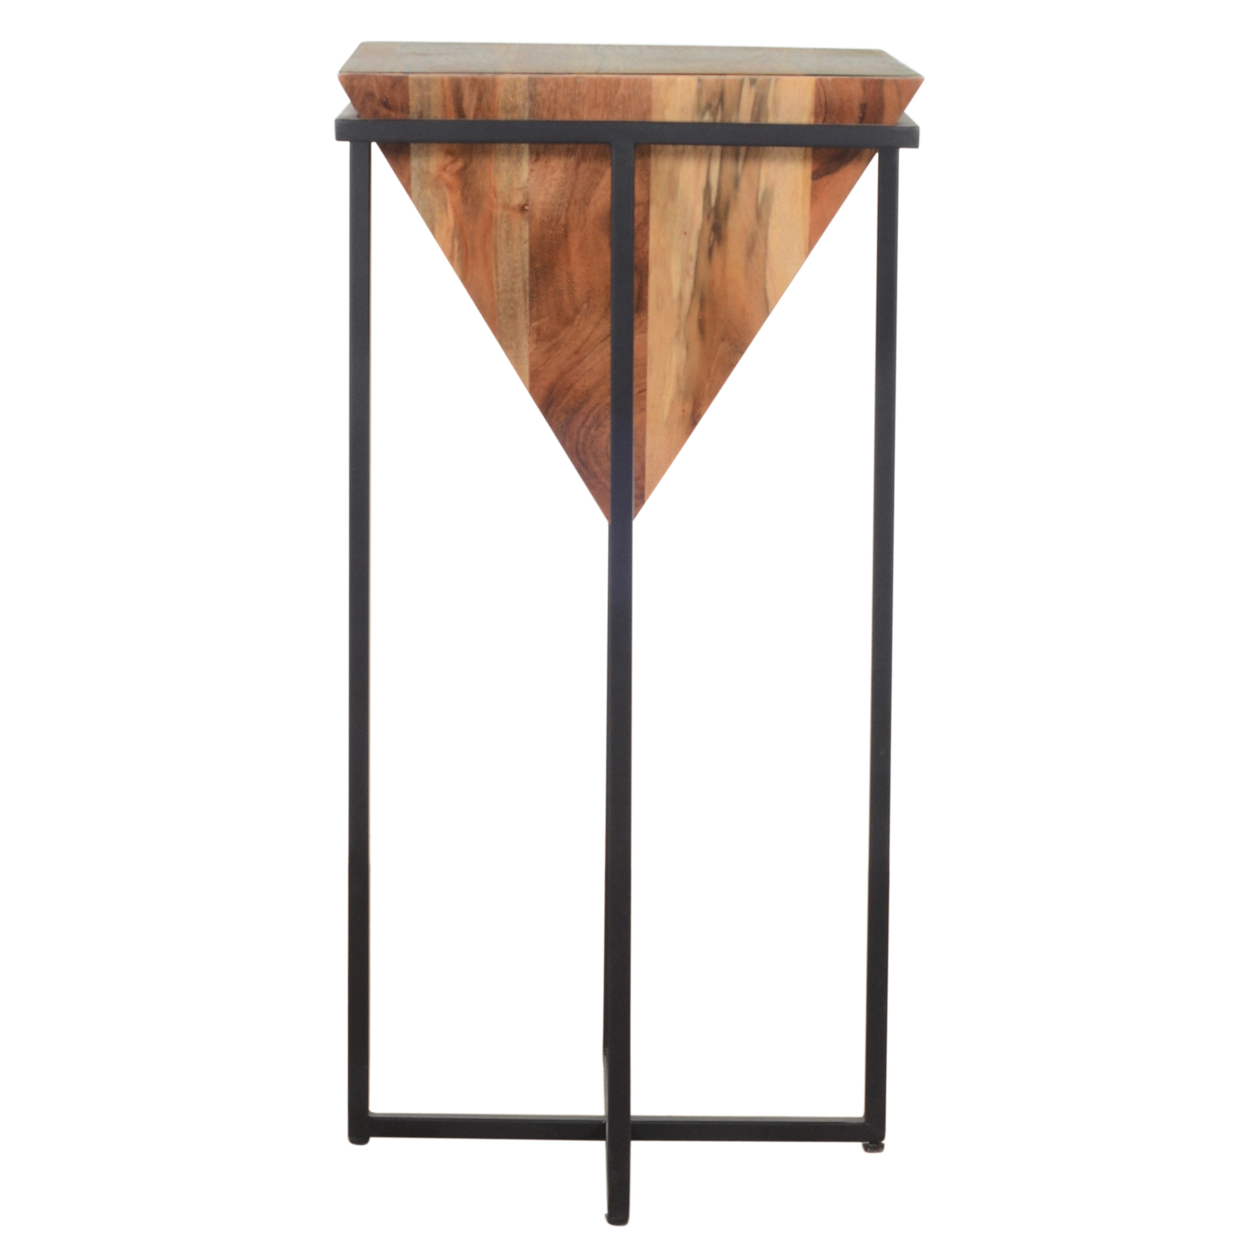 30 Inch Pyramid Shape Wooden Side Table With Cross Metal Base, Brown And Black- Saltoro Sherpi